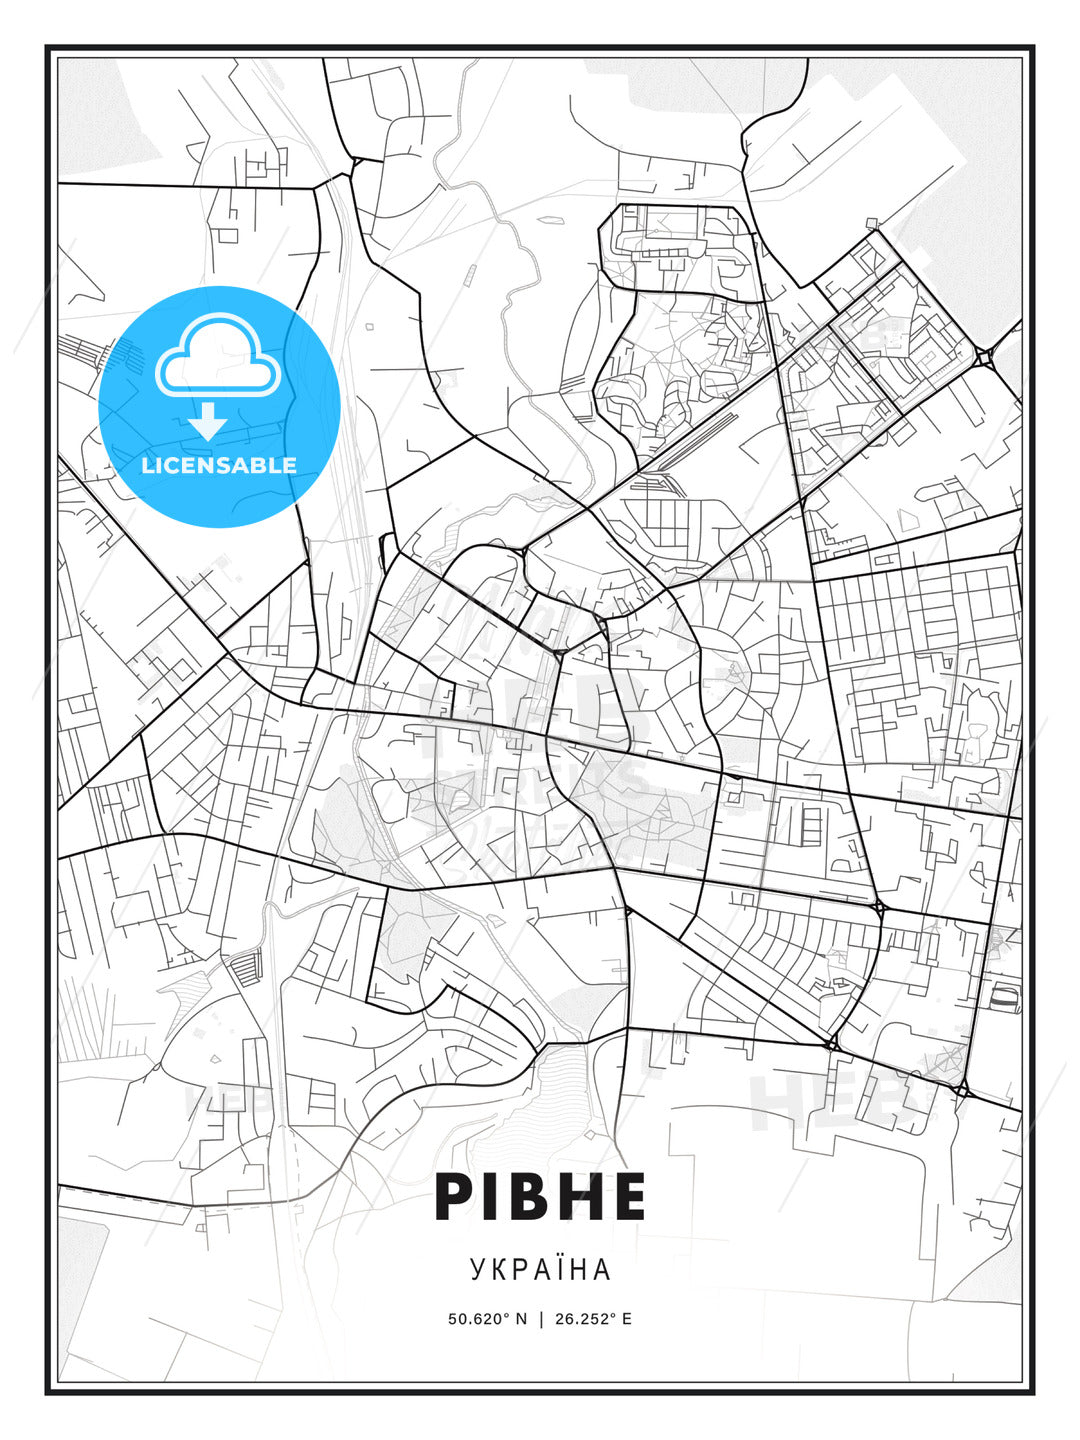 РІВНЕ / Rivne, Ukraine, Modern Print Template in Various Formats - HEBSTREITS Sketches